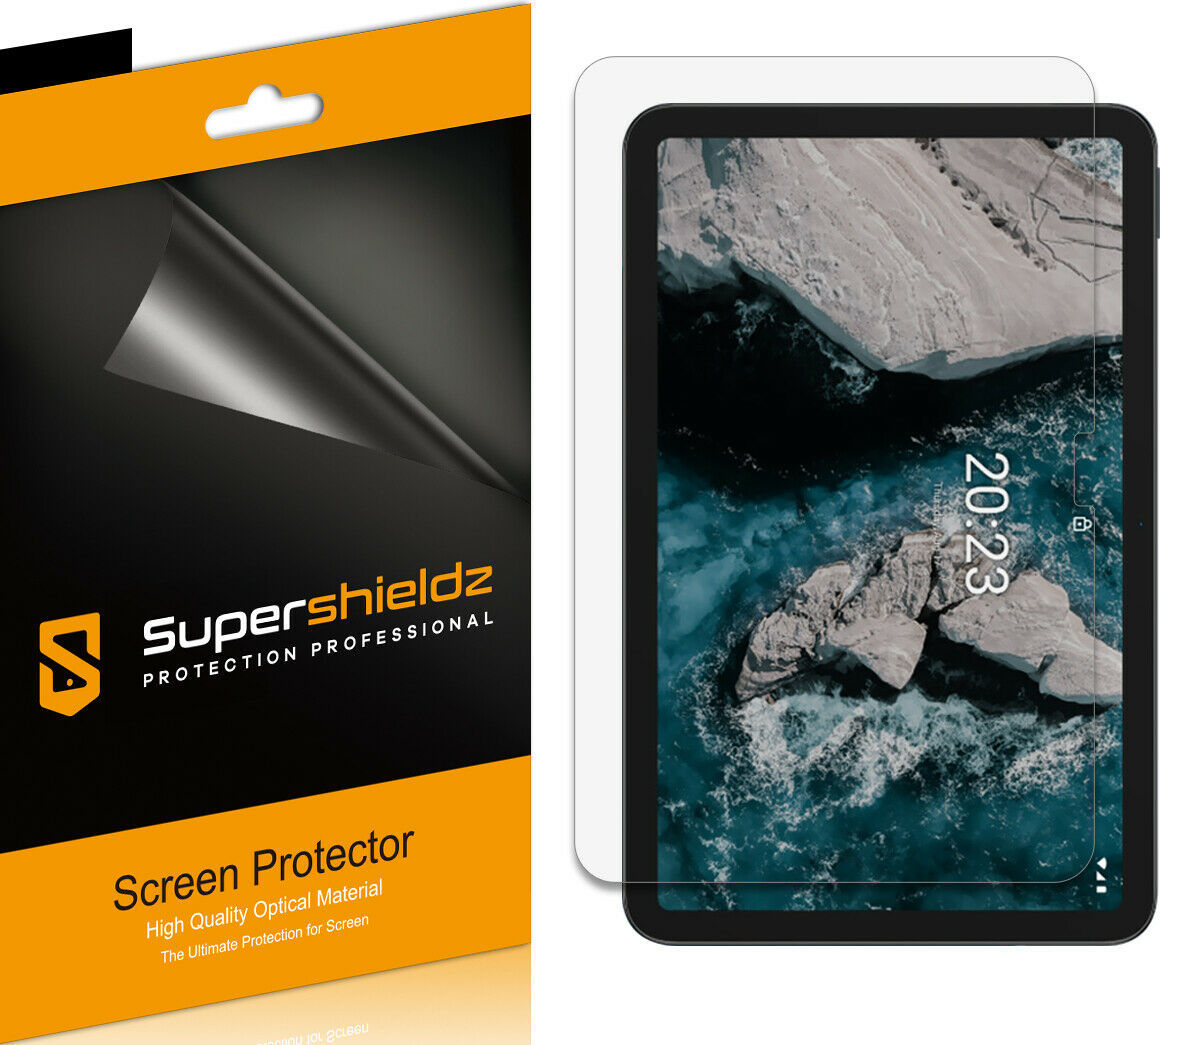 3X Supershieldz Clear Screen Protector for Nokia T20 Tablet (10.4 inch) - $16.99